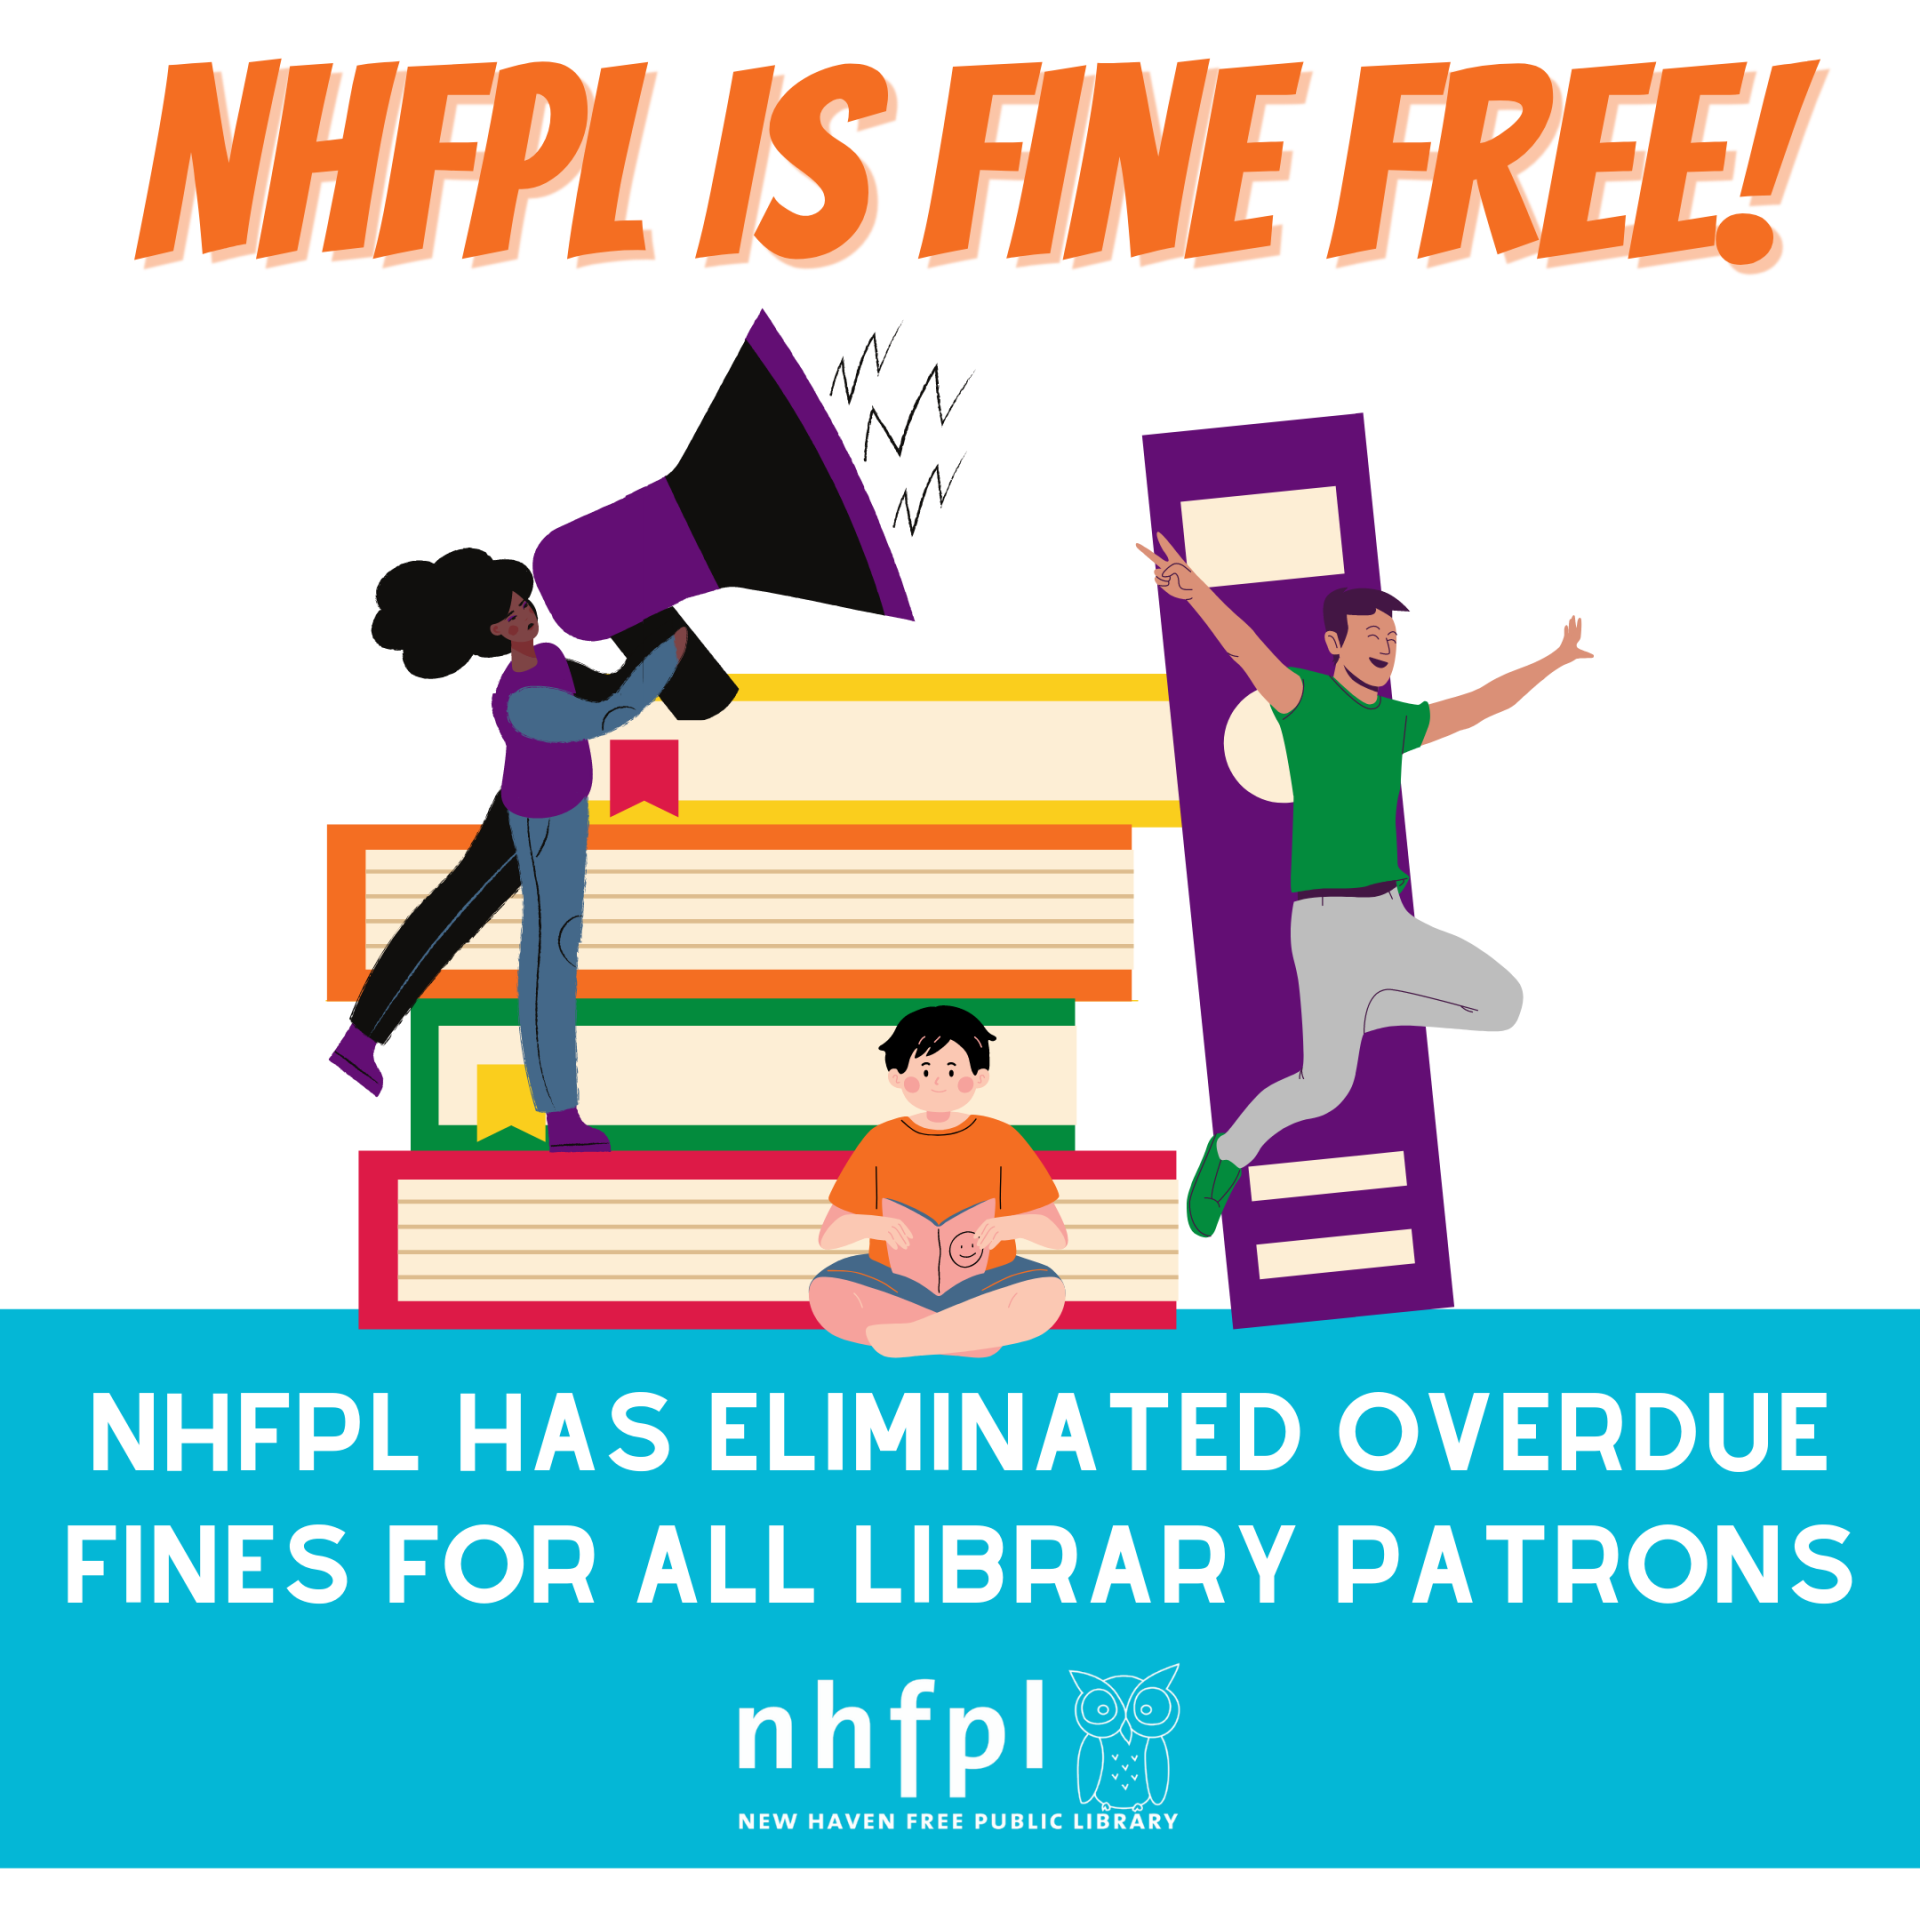 NHFPL is Fine Free